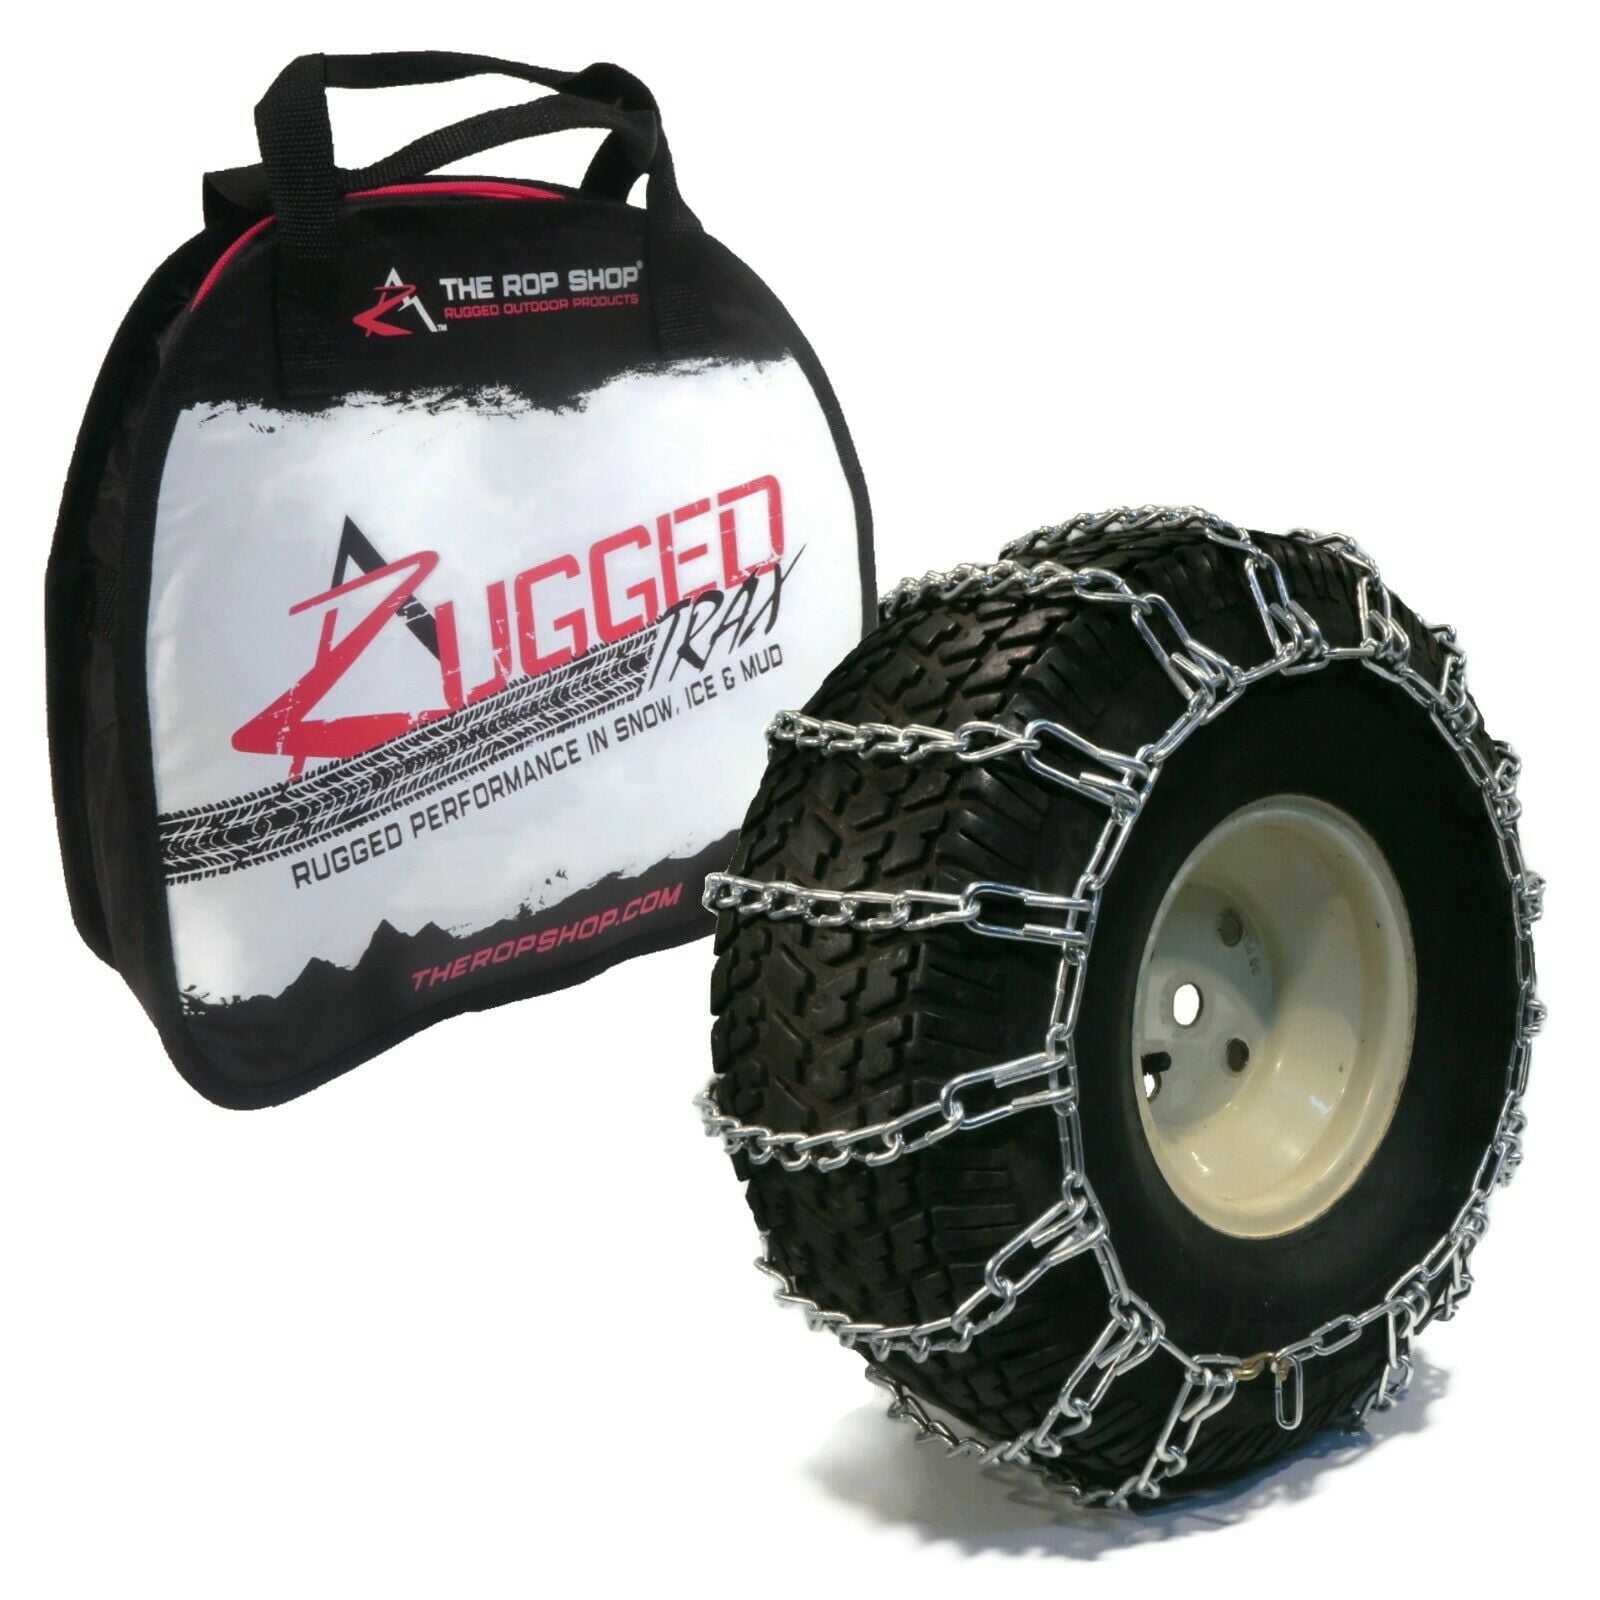 The ROP Shop 2 Link TIRE Chains & TENSIONERS 18x8.5x8 for UTV ATV Vehicle Peerless MaxTrac